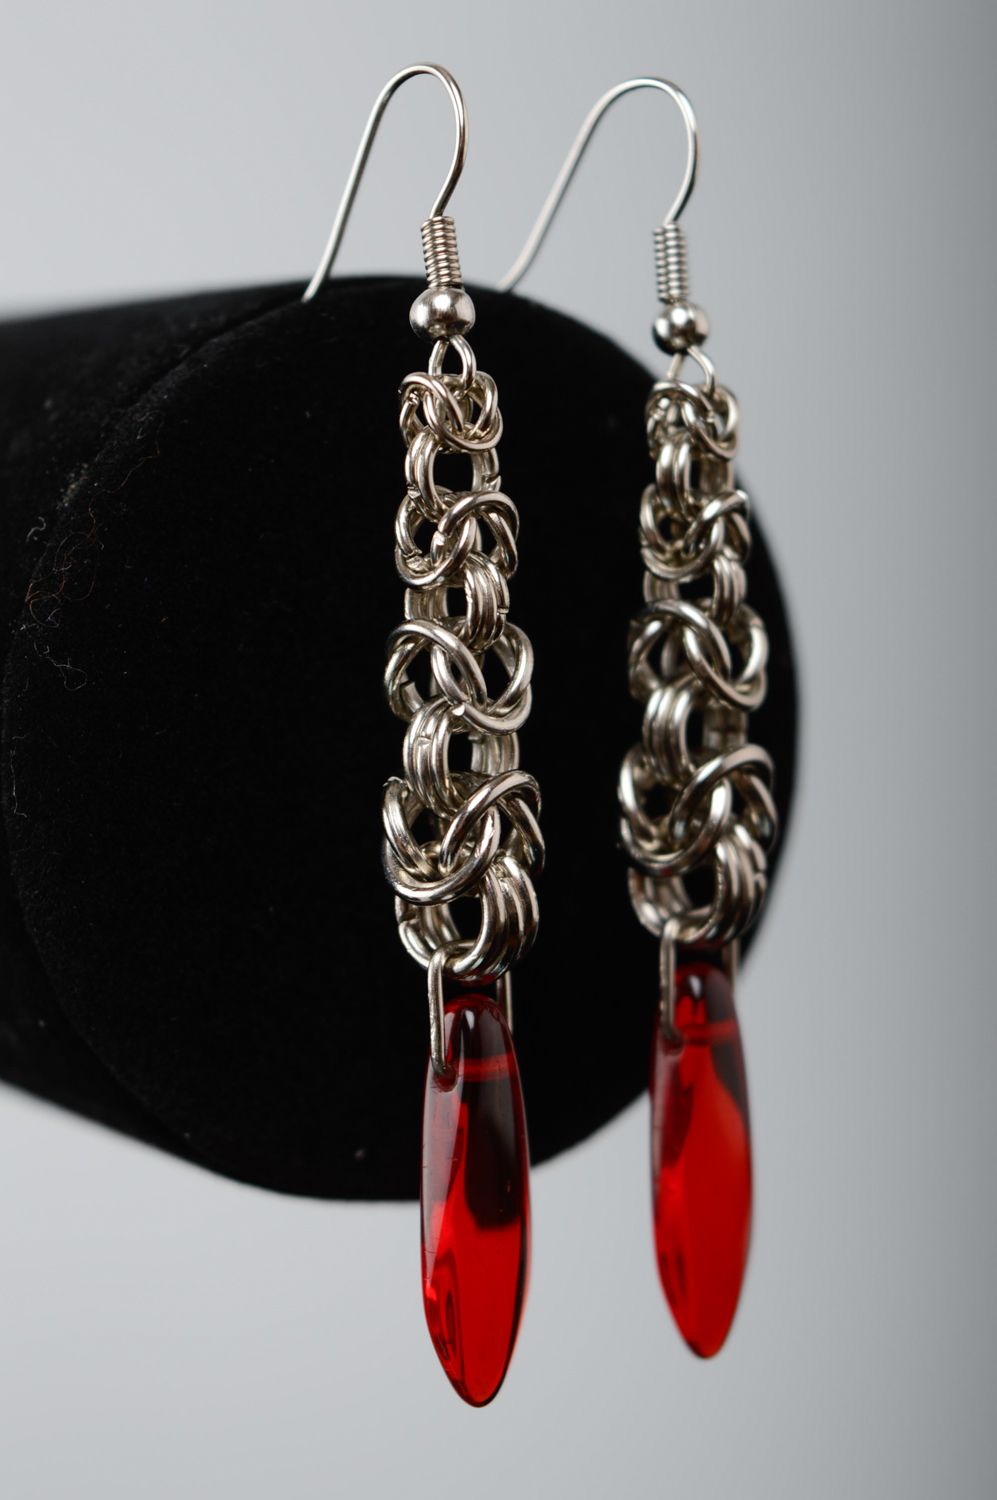 Long metal earrings with red beads made using chain armor weaving technique photo 1